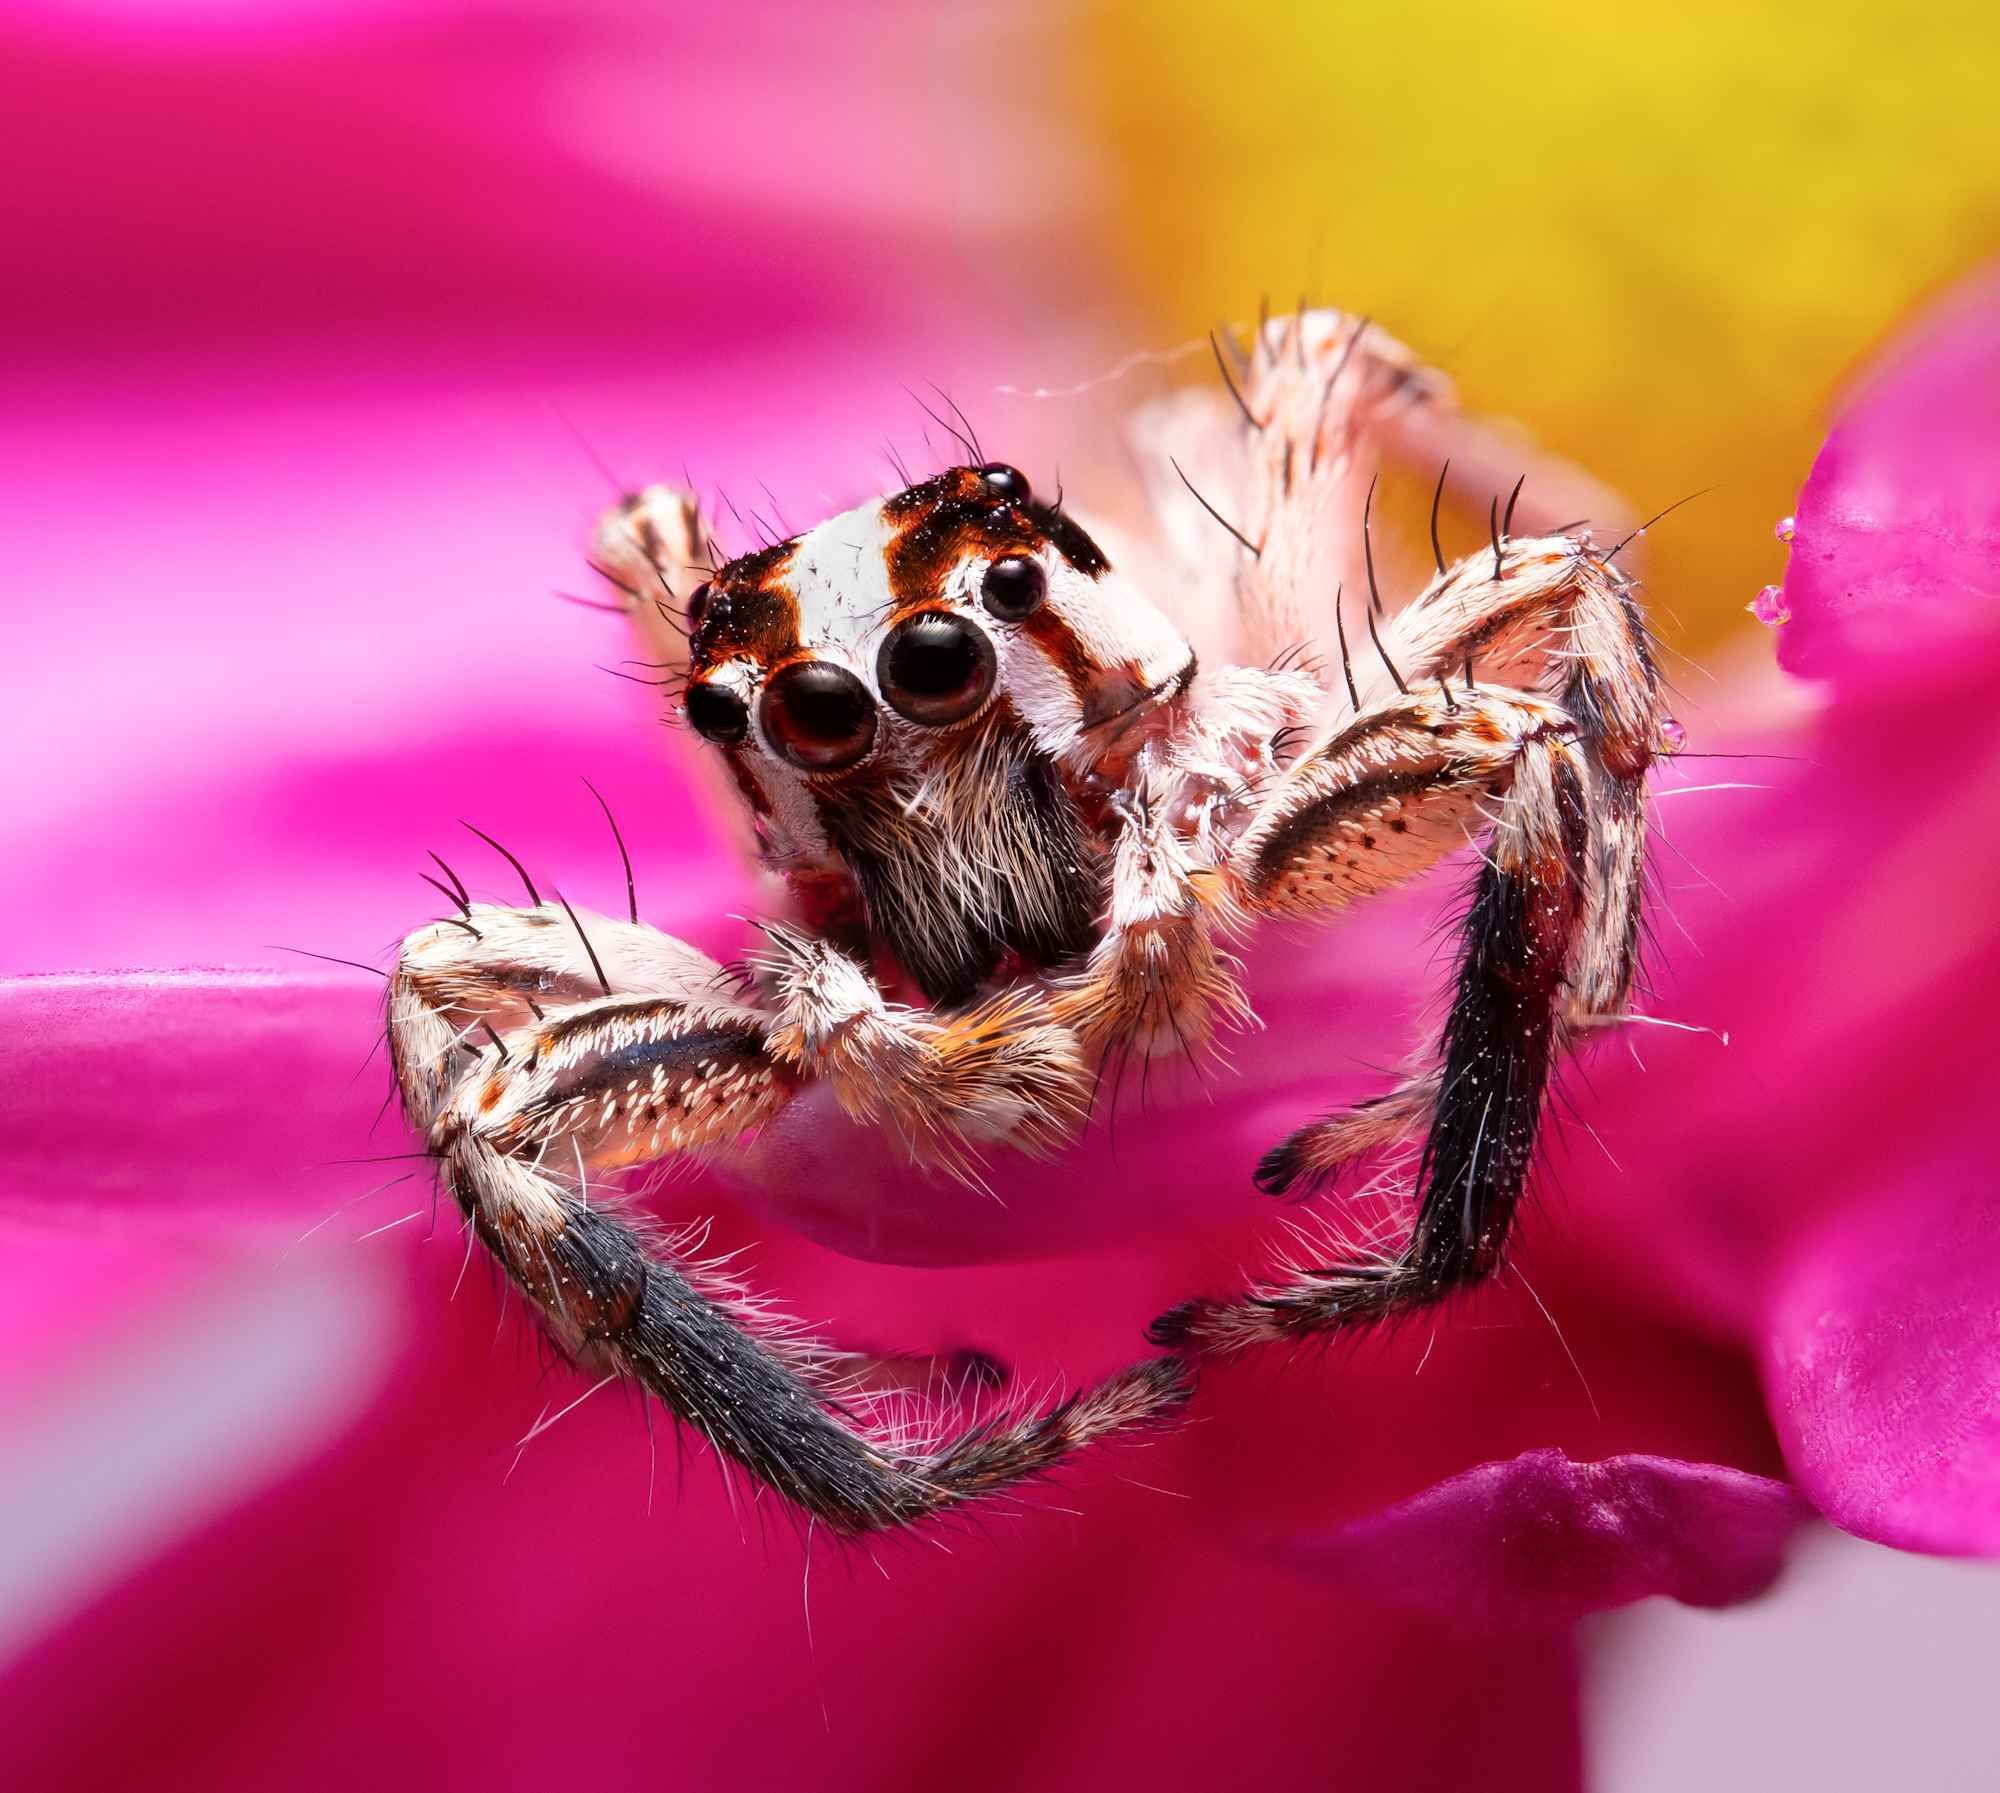 Jumping spider super macrography 